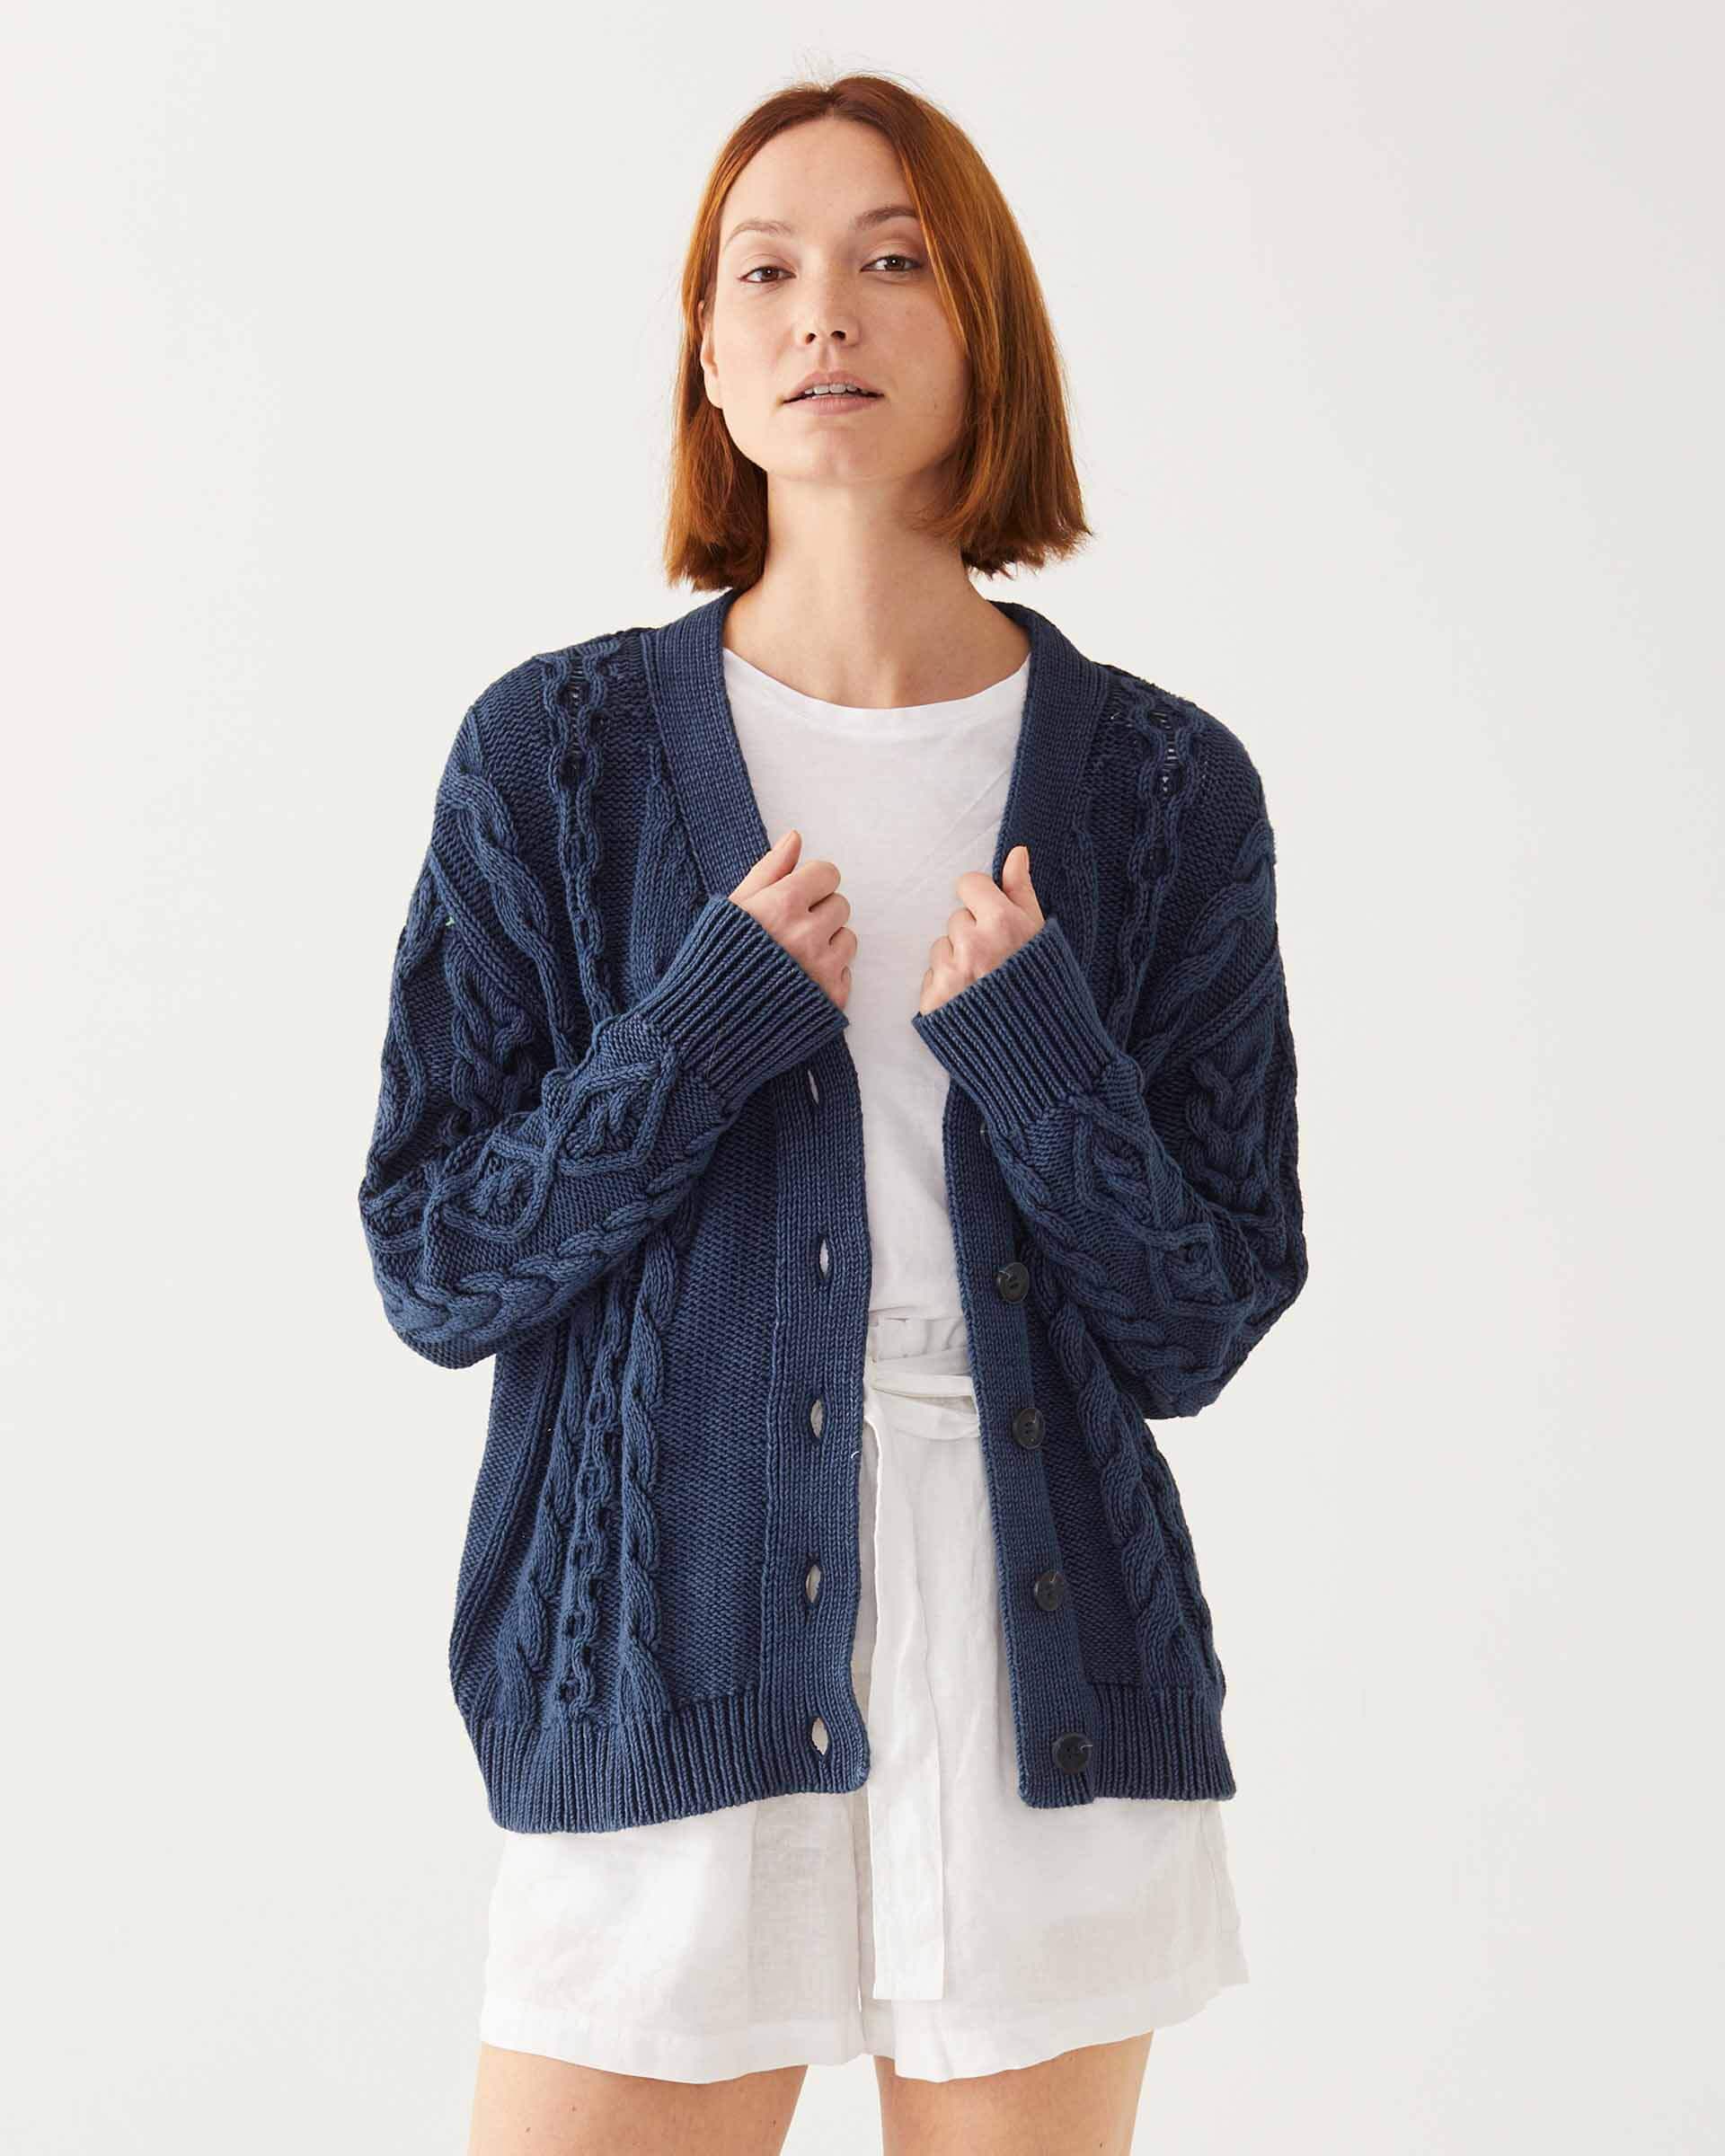 Female wearing a navy blue knitted cardigan in front of white wall